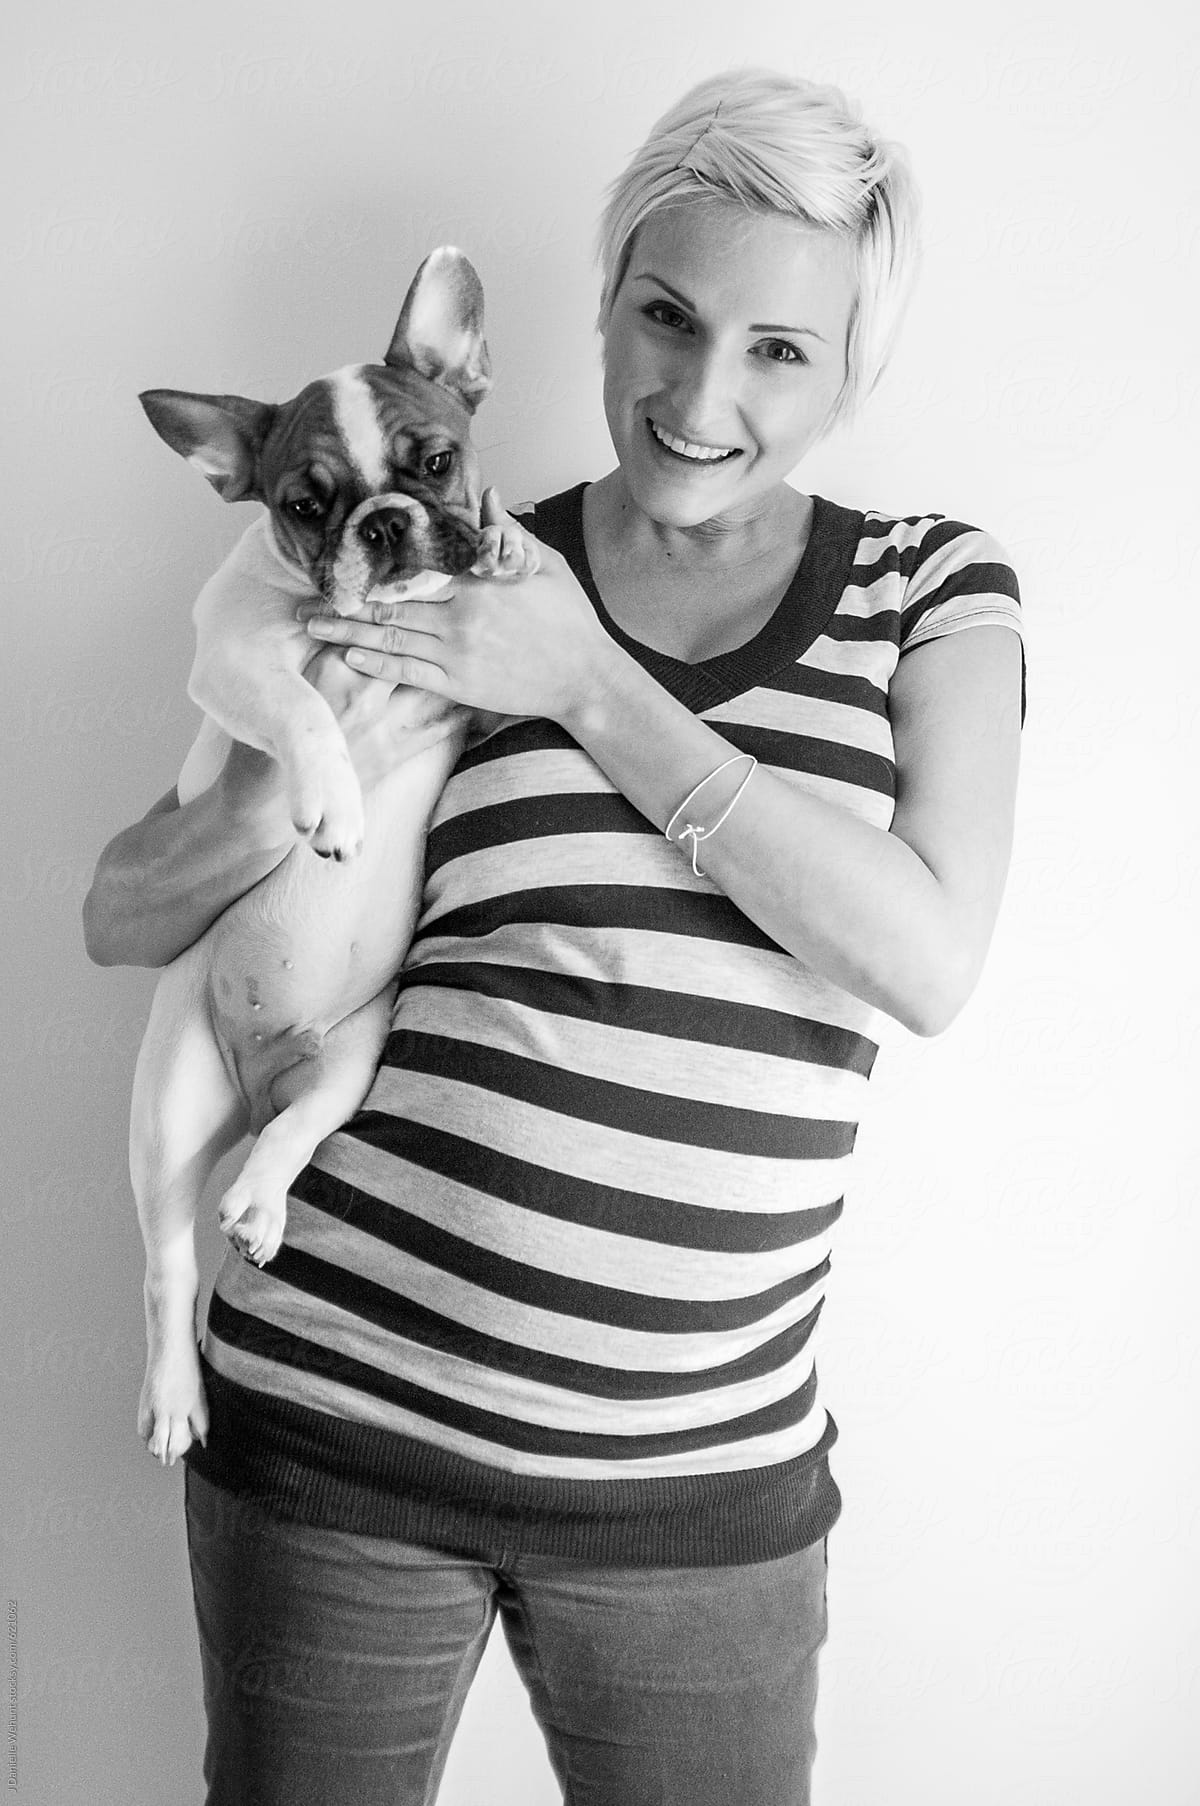 A pregnant caucasian woman with blonde hair holding a french bulldog puppy.